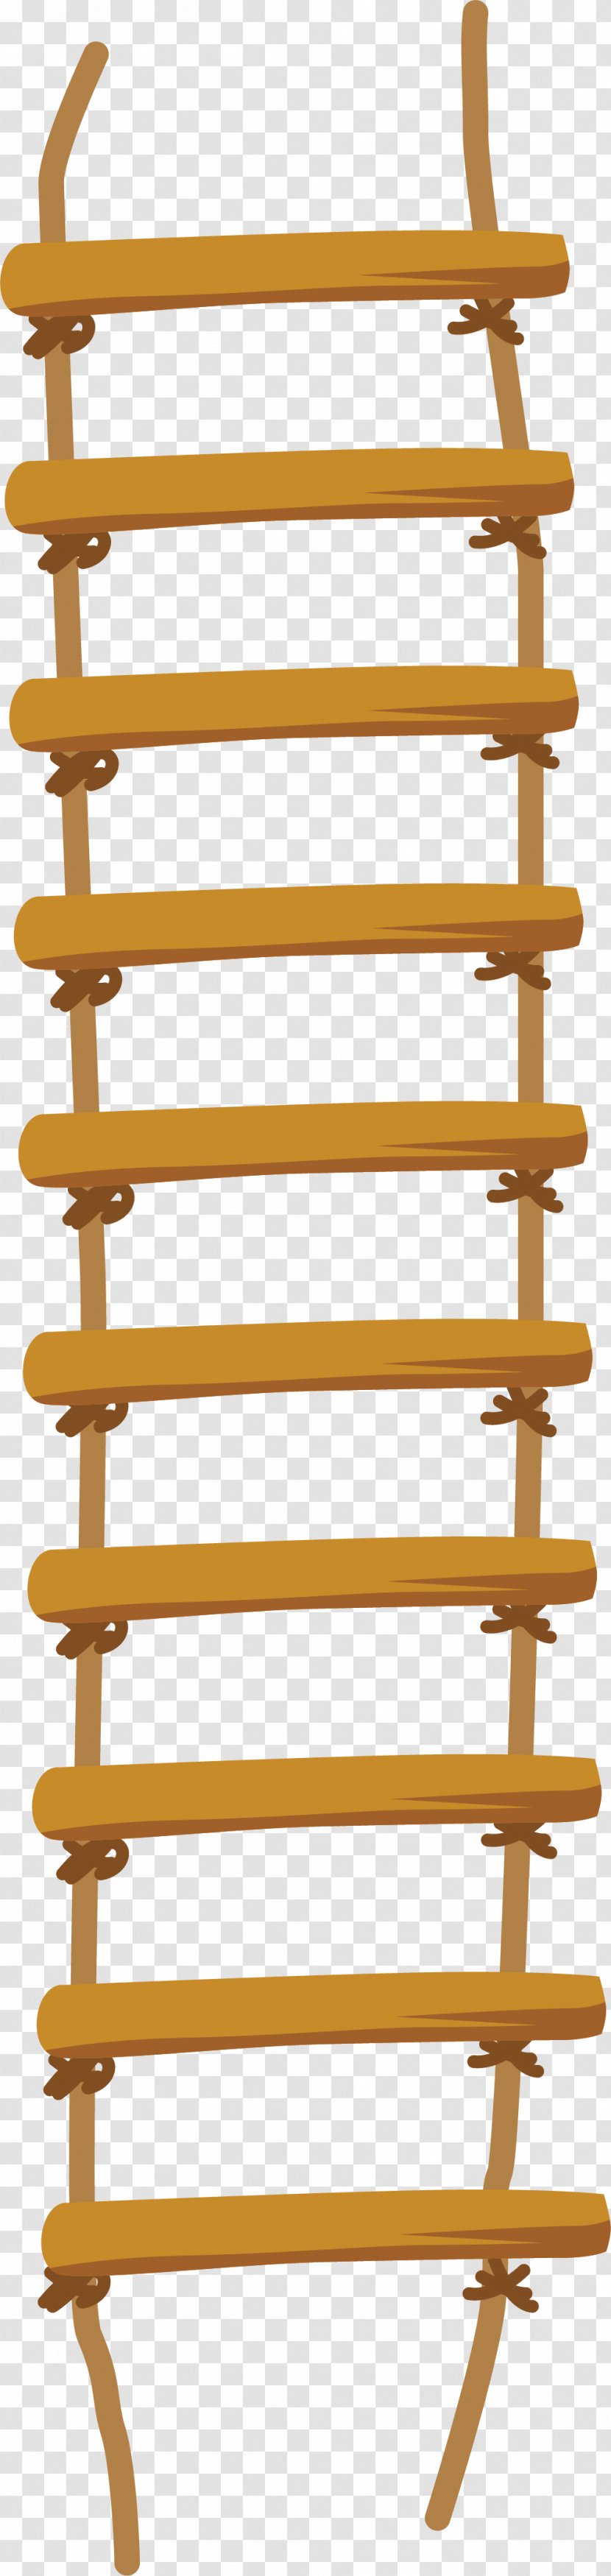 Ladder Rope Television Image - Fall Transparent PNG